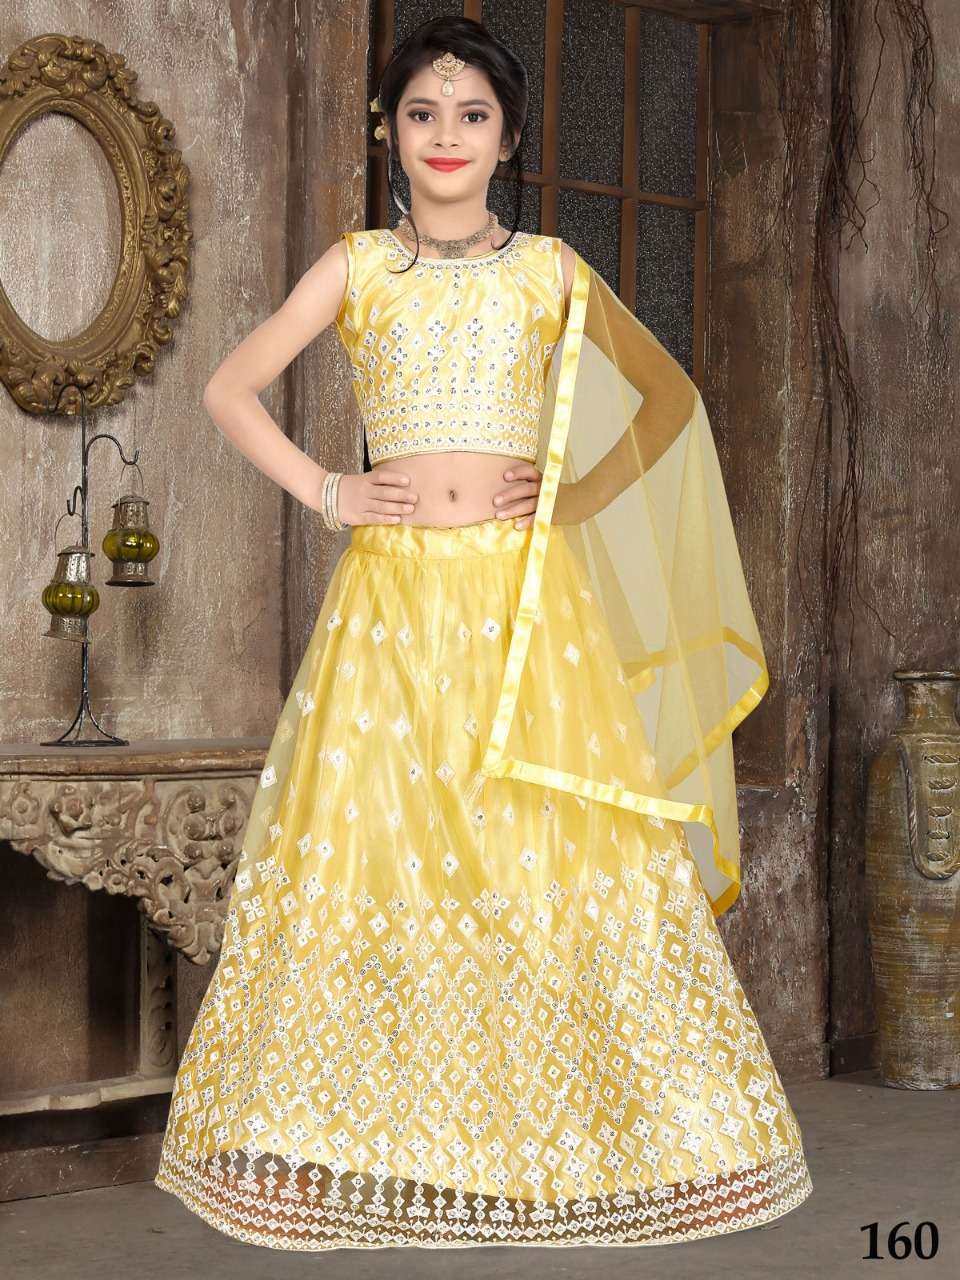 Aaradhna Vol-13 By Fashid Wholesale 159 To 162 Series Beautiful Colorful Fancy Wedding Collection Occasional Wear & Party Wear Net Lehengas At Wholesale Price